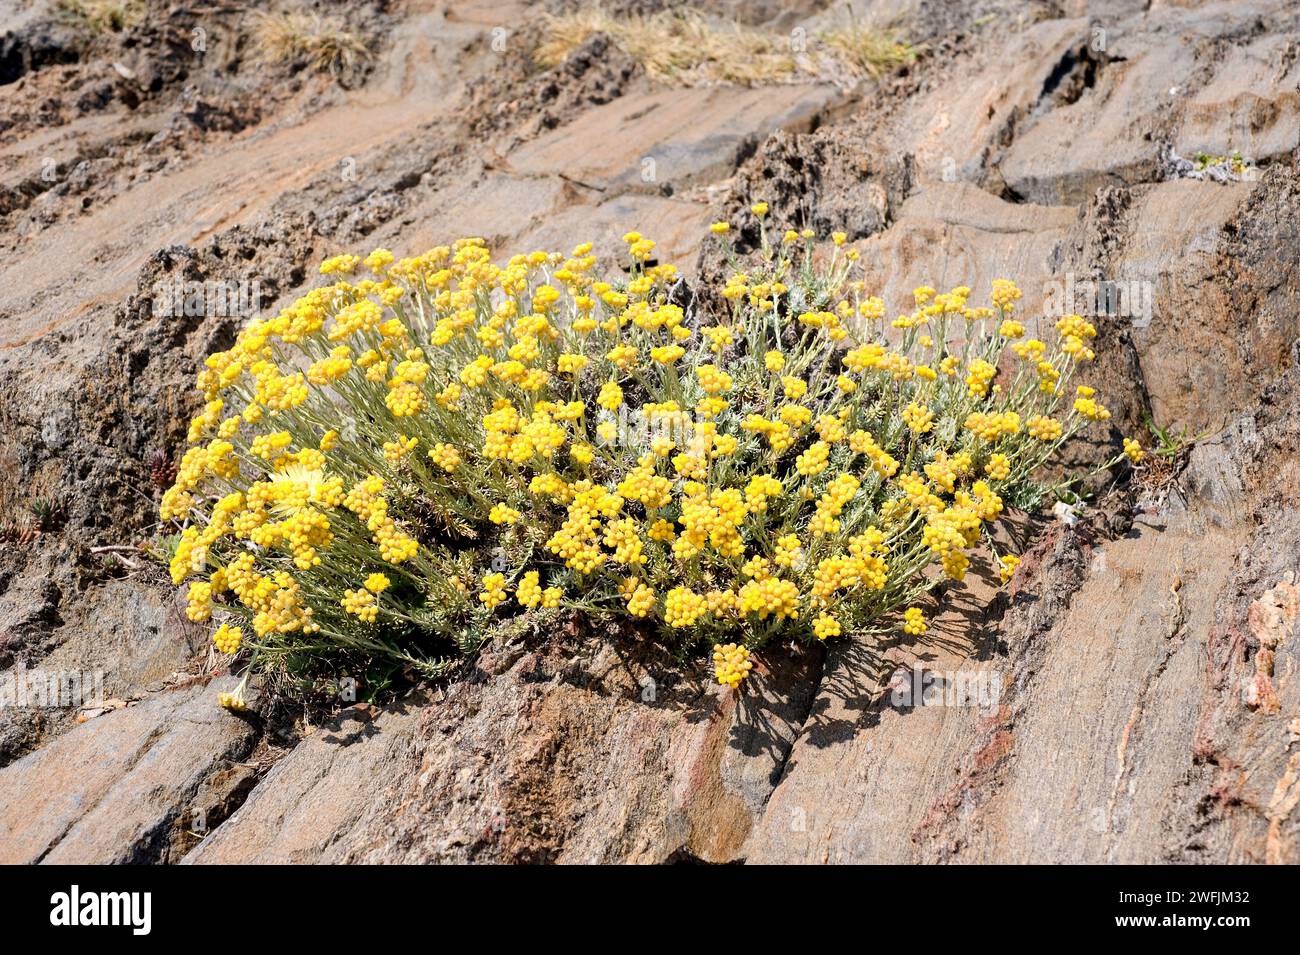 Perpetual, perennial or everlasting (Helichrysum stoechas) is an evergreen shrub native to southern Europe, specially in Iberian Peninsula. This photo Stock Photo